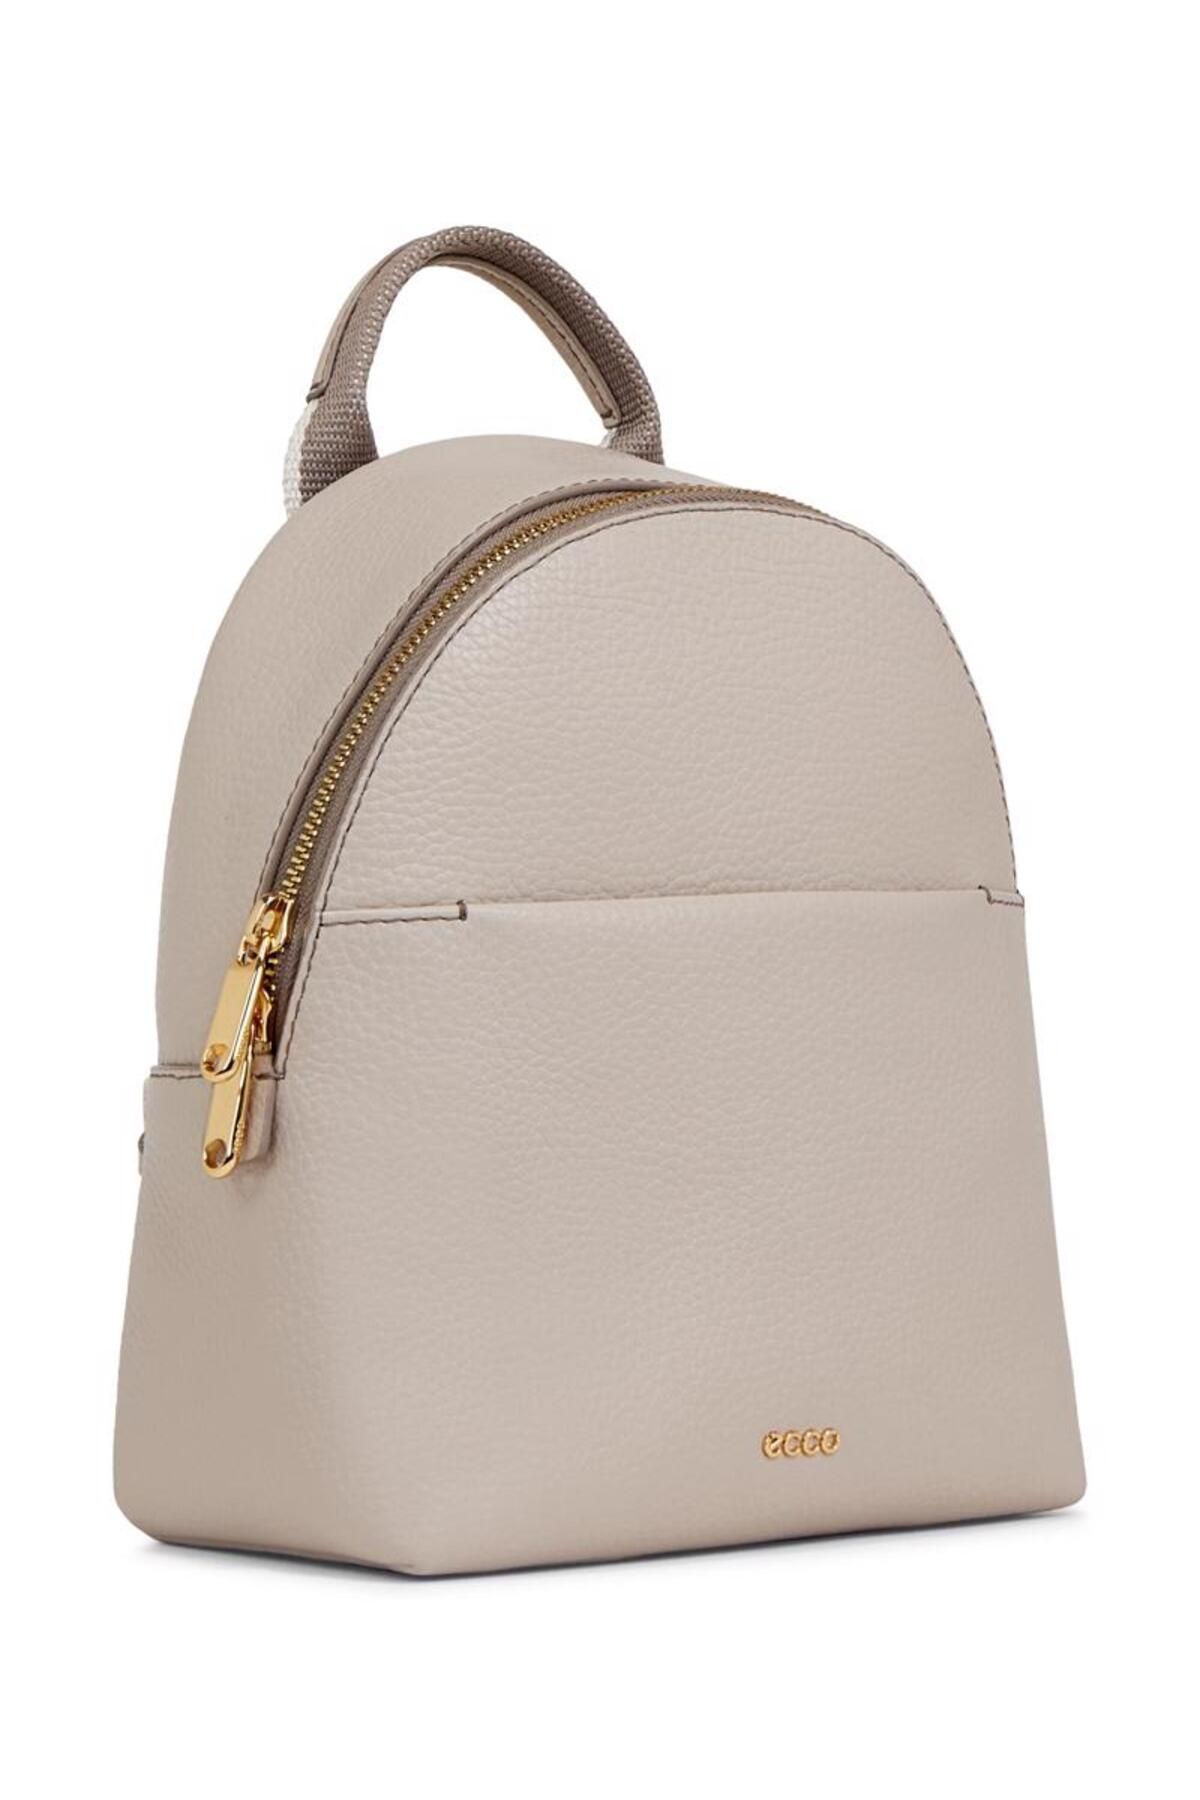 Ecco Round Pack S Pebbled Leather Bag